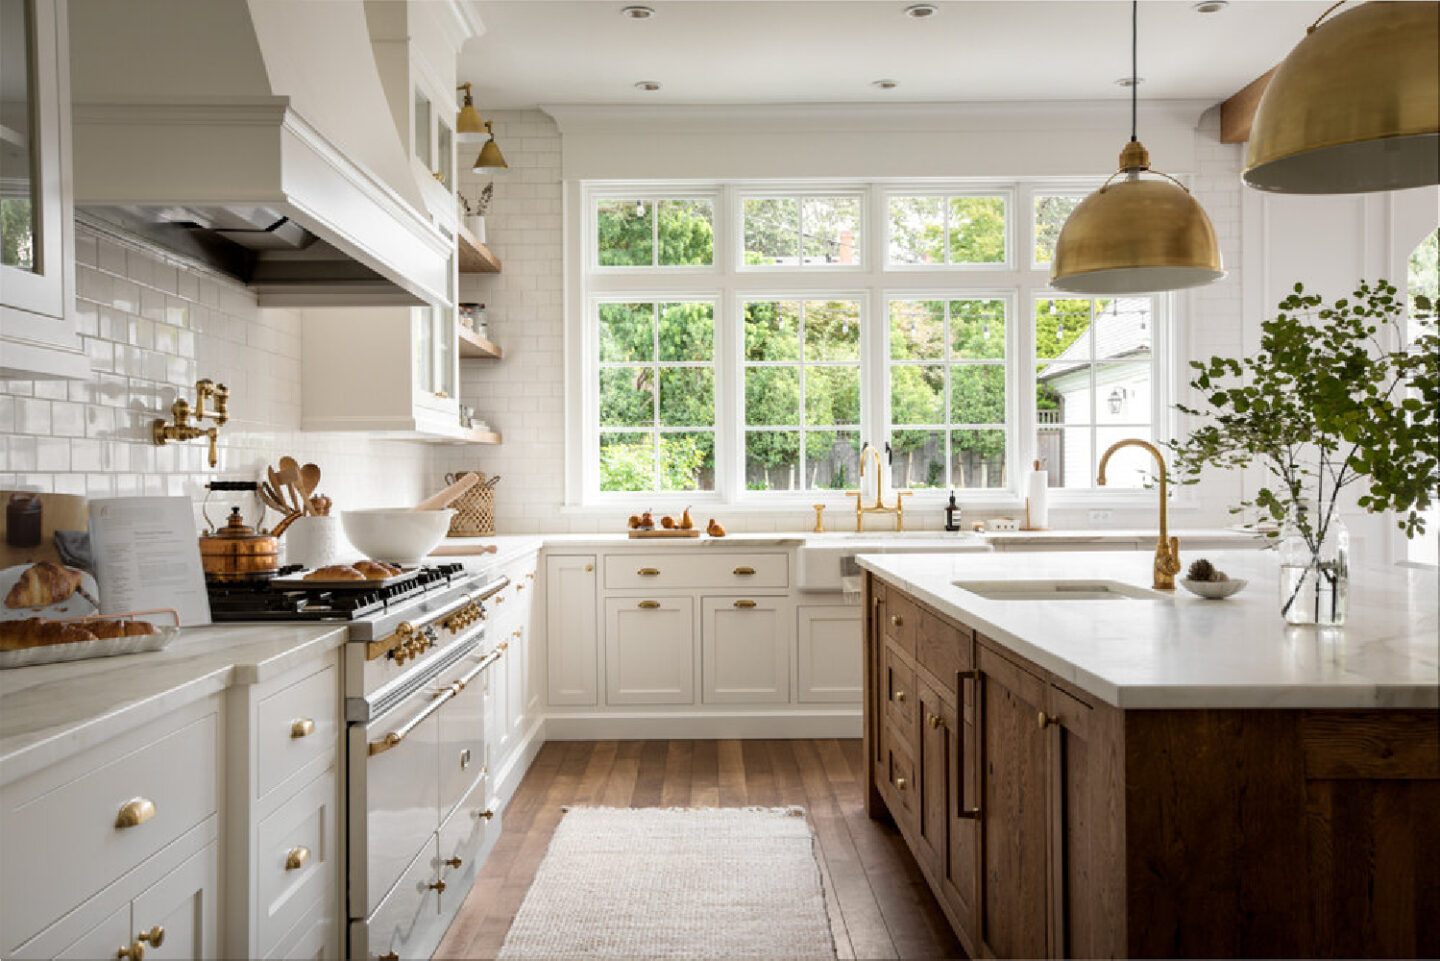 White kitchen in beautiful French country home with interior design by Jenny Martin Design. #frenchcountryhome #interiordesign